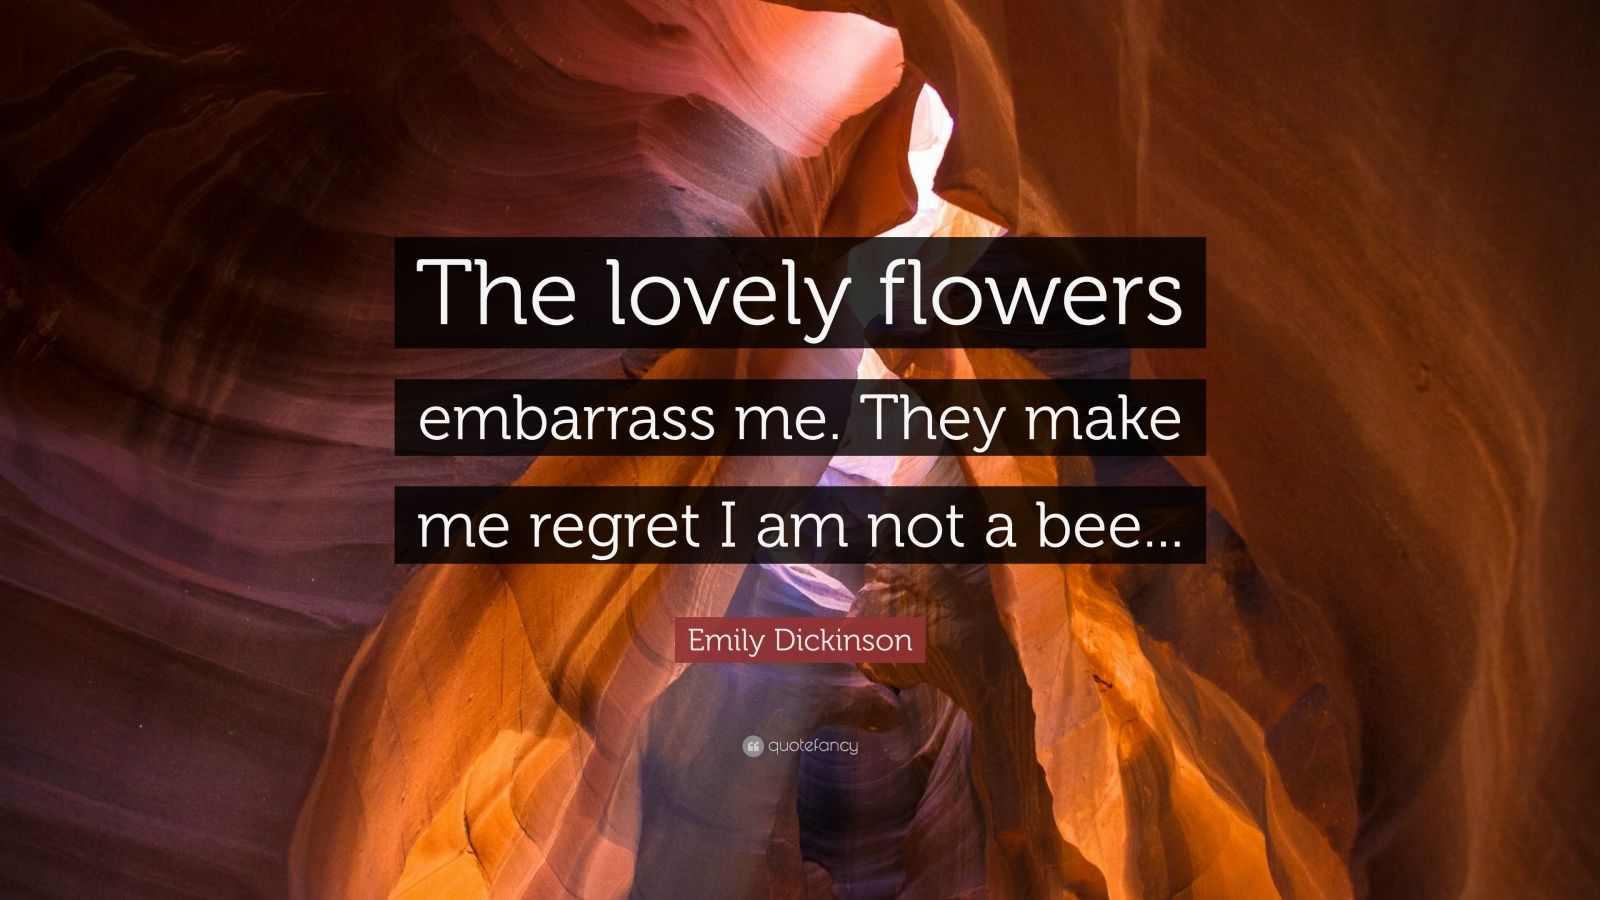 Art Print Emily Dickinson The Lovely Flowers Embarrass Me They Make Me Regret I Am Not A Bee